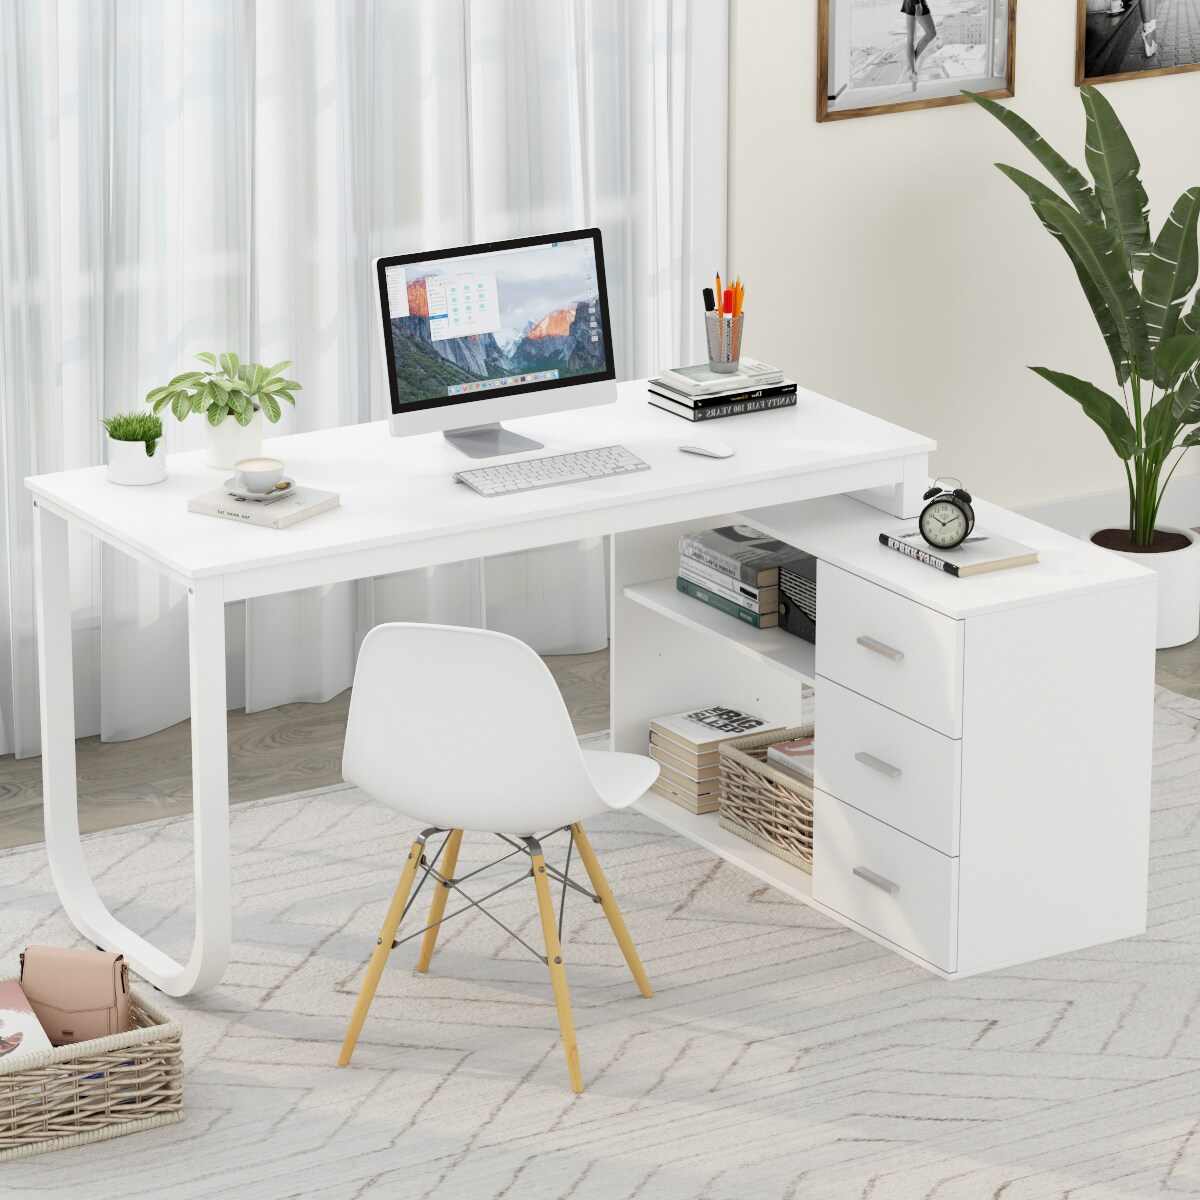 Fufu A Shaped Executive Desk 55 1 In White Modern Contemporary Hutch Included The Desks Department At Lowes Com